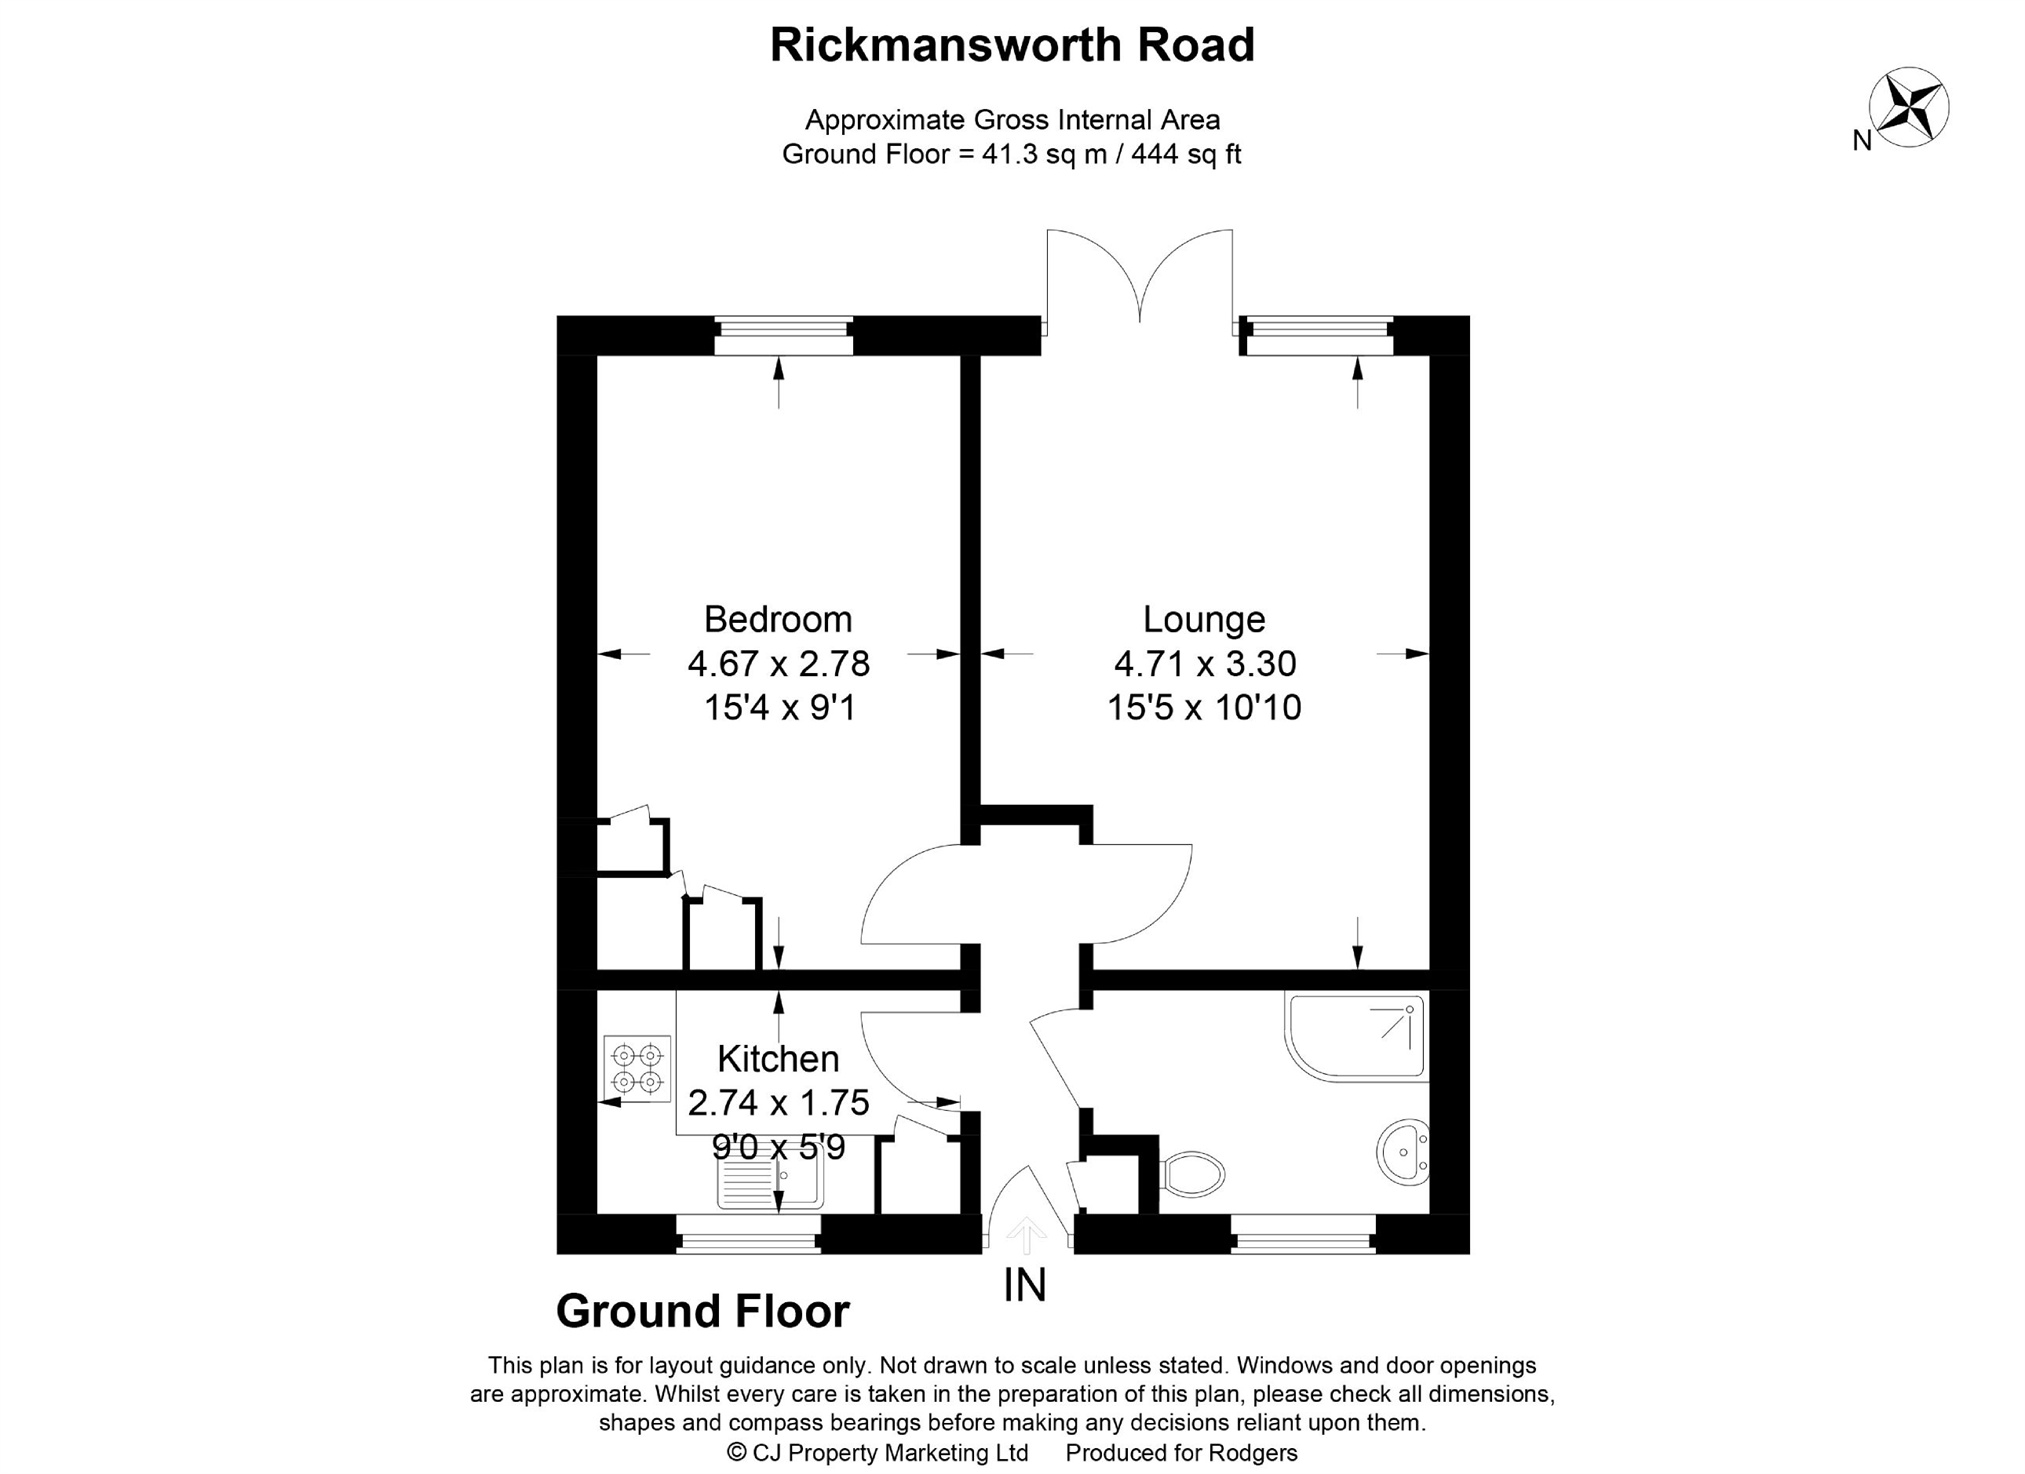 Floorplans For Rickmansworth Road, Harefield, Middlesex